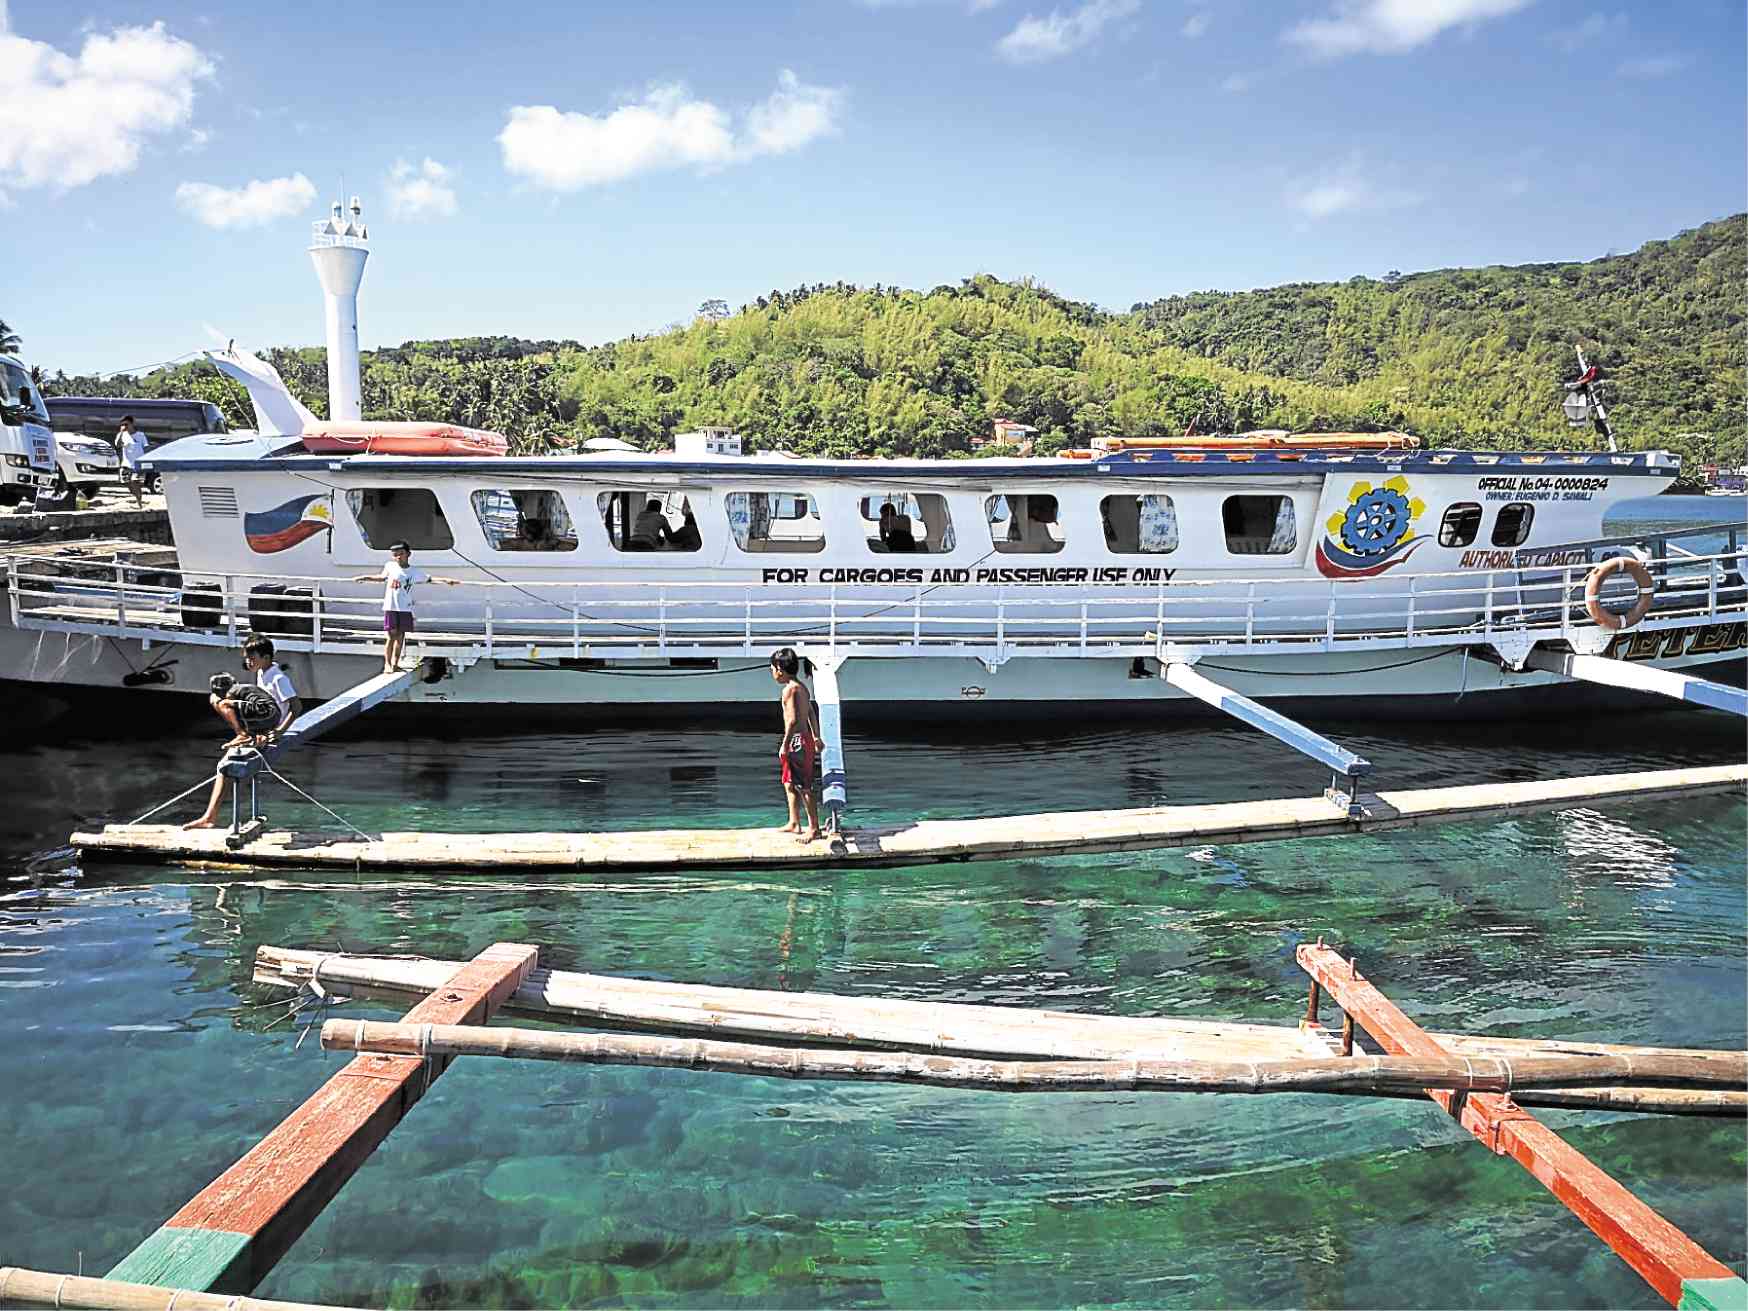 CalapanBatangas trips via small vessels canceled Inquirer News